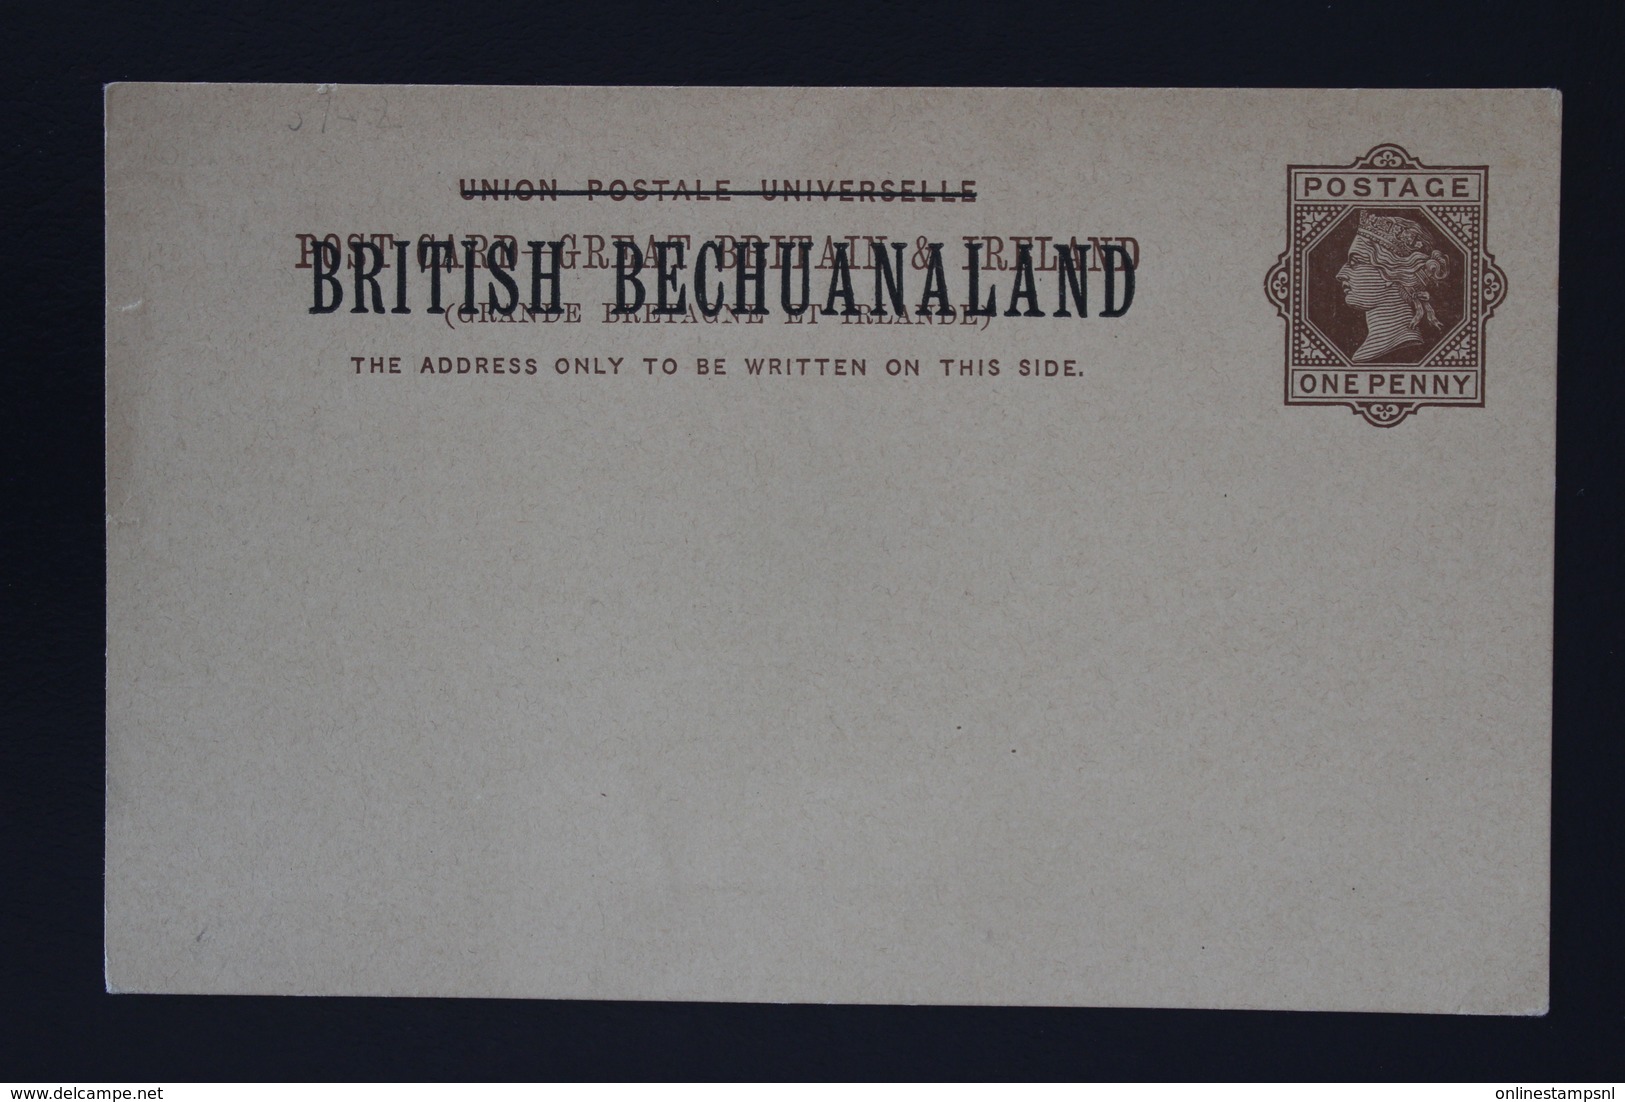 BRITISH BECHUANALAND  Postcard Used + Unused HG P4 1894 Cancel 555 Vryburg + CDS -> Cape Town - 1885-1895 Crown Colony